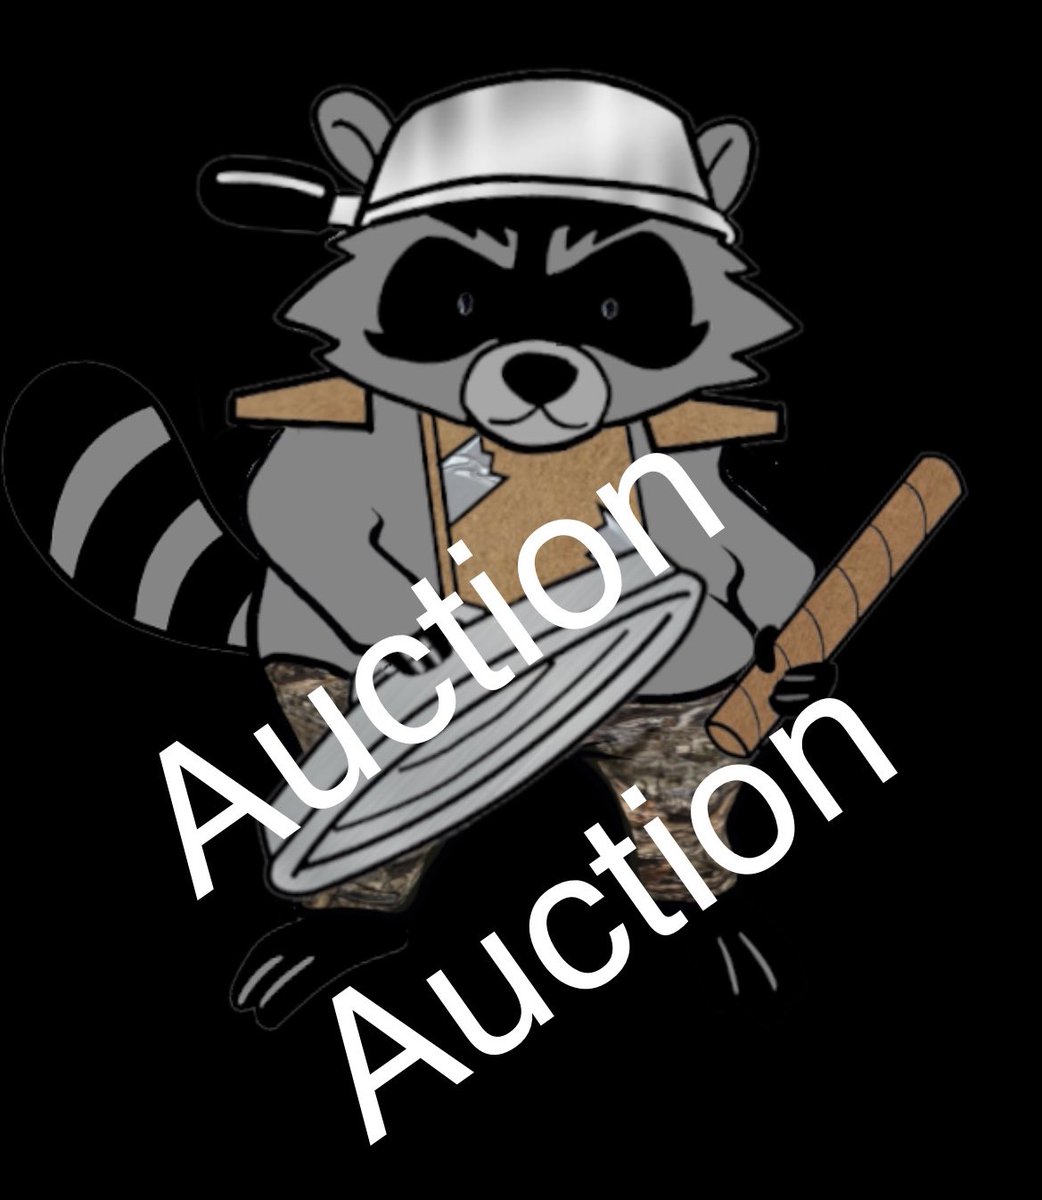 Fellas…🚨AUCTION TIME🚨This incredible one of a raccoon fella made by @flunkertungle9 to raise funds for the amazing @3xR_team . Auction will run for 24hrs. Starting bid $10. Please bid below- added bonus this fella with the renegade team ! Lets do this!!